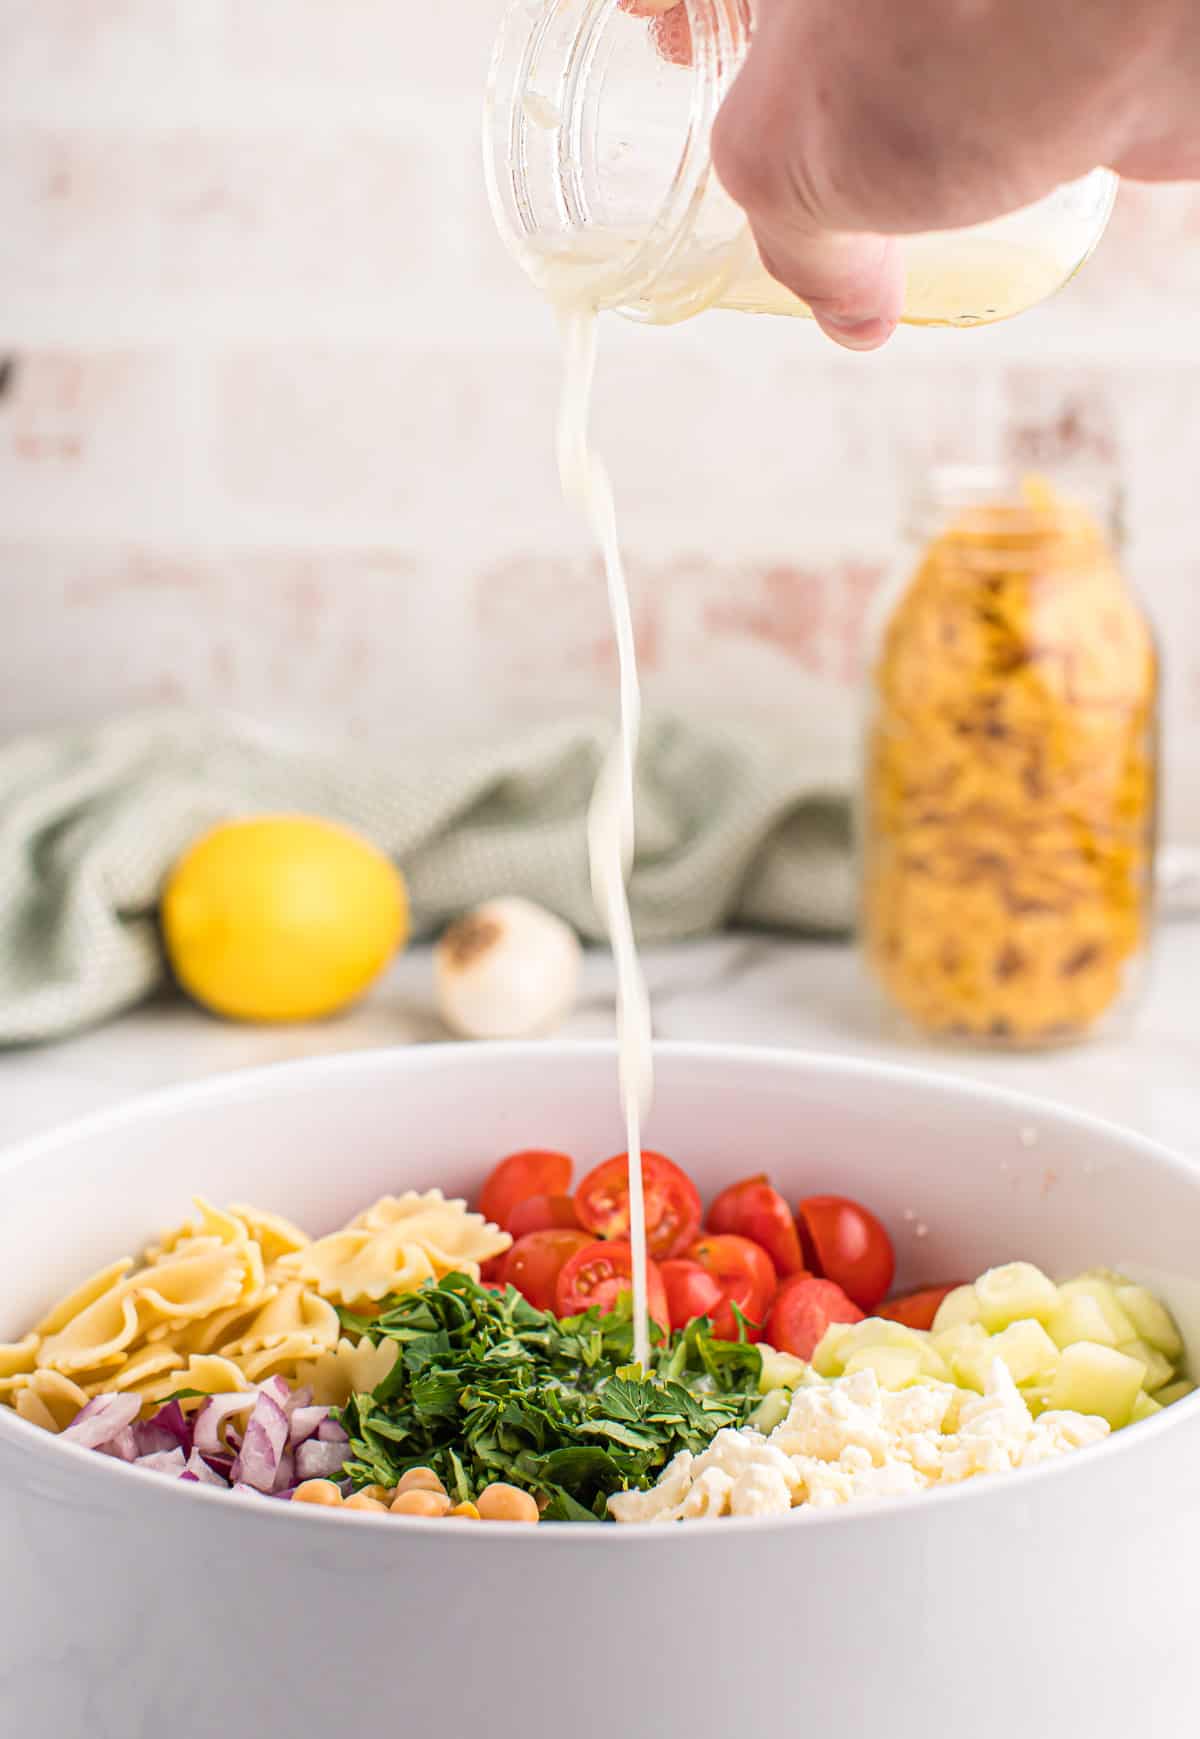 pouring the dressing over the pasta salad